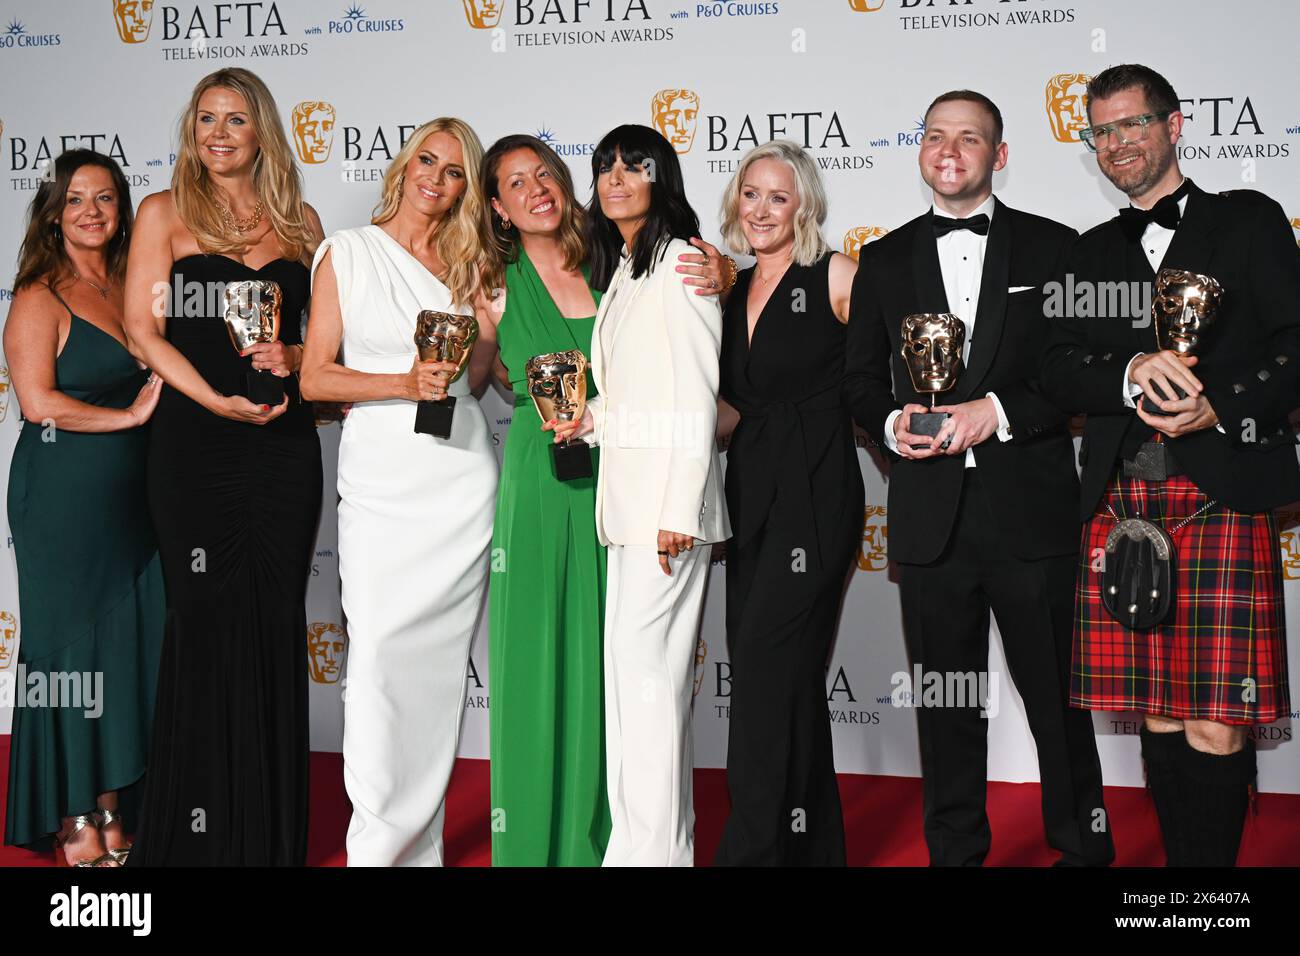 Royal Festival Hall, LONDON, ENGLAND, UK - MAY 12 2024: (From second L-R) Stefania Aleksander, Tess Daly, Sarah James, Claudia Winkleman, Nicola Fitzgerald, Jack Gledhill and Robin Lee-Perrella pose with the Entertainment Award for 'Strictly Come Dancing' in the Winners Room during the 2024 BAFTA Television Awards with P&O Cruises, London, UK. Credit: See Li/Picture Capital/Alamy Live News Stock Photo